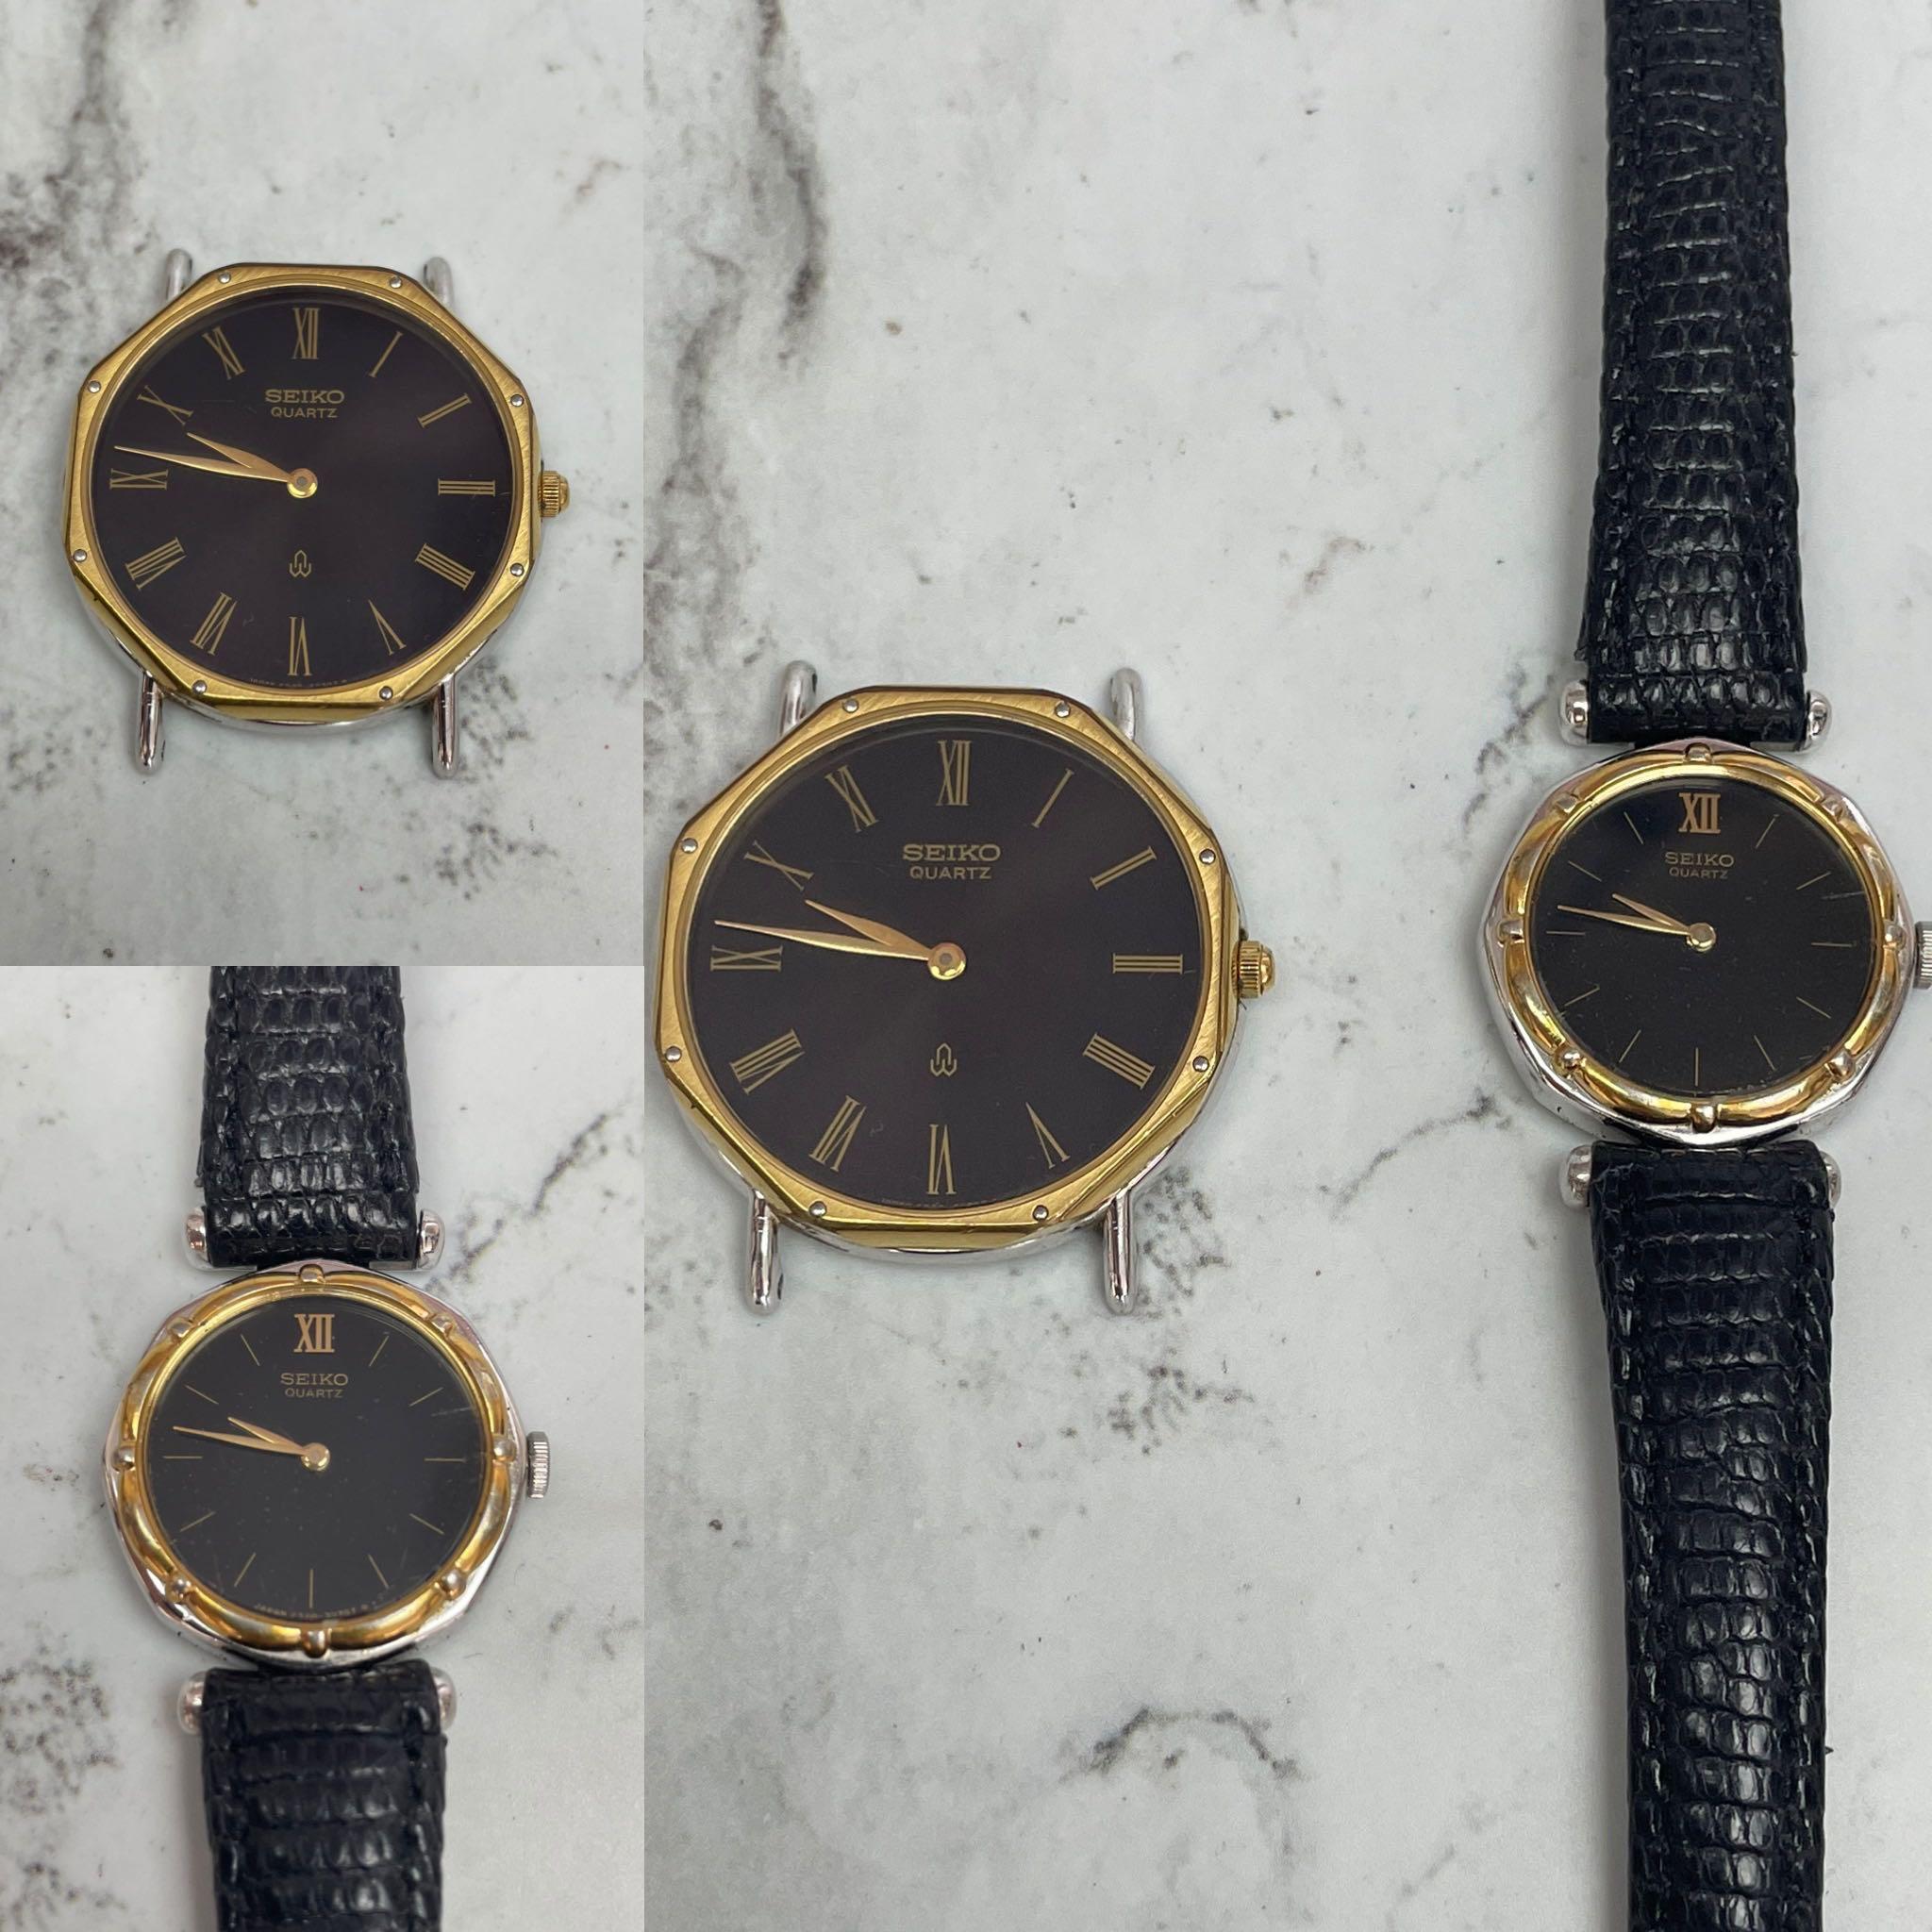 210137e) Seiko Vintage Men's and Women's (Sold) Quartz Watches Circa 1980/ 90s, Men's Fashion, Watches & Accessories, Watches on Carousell